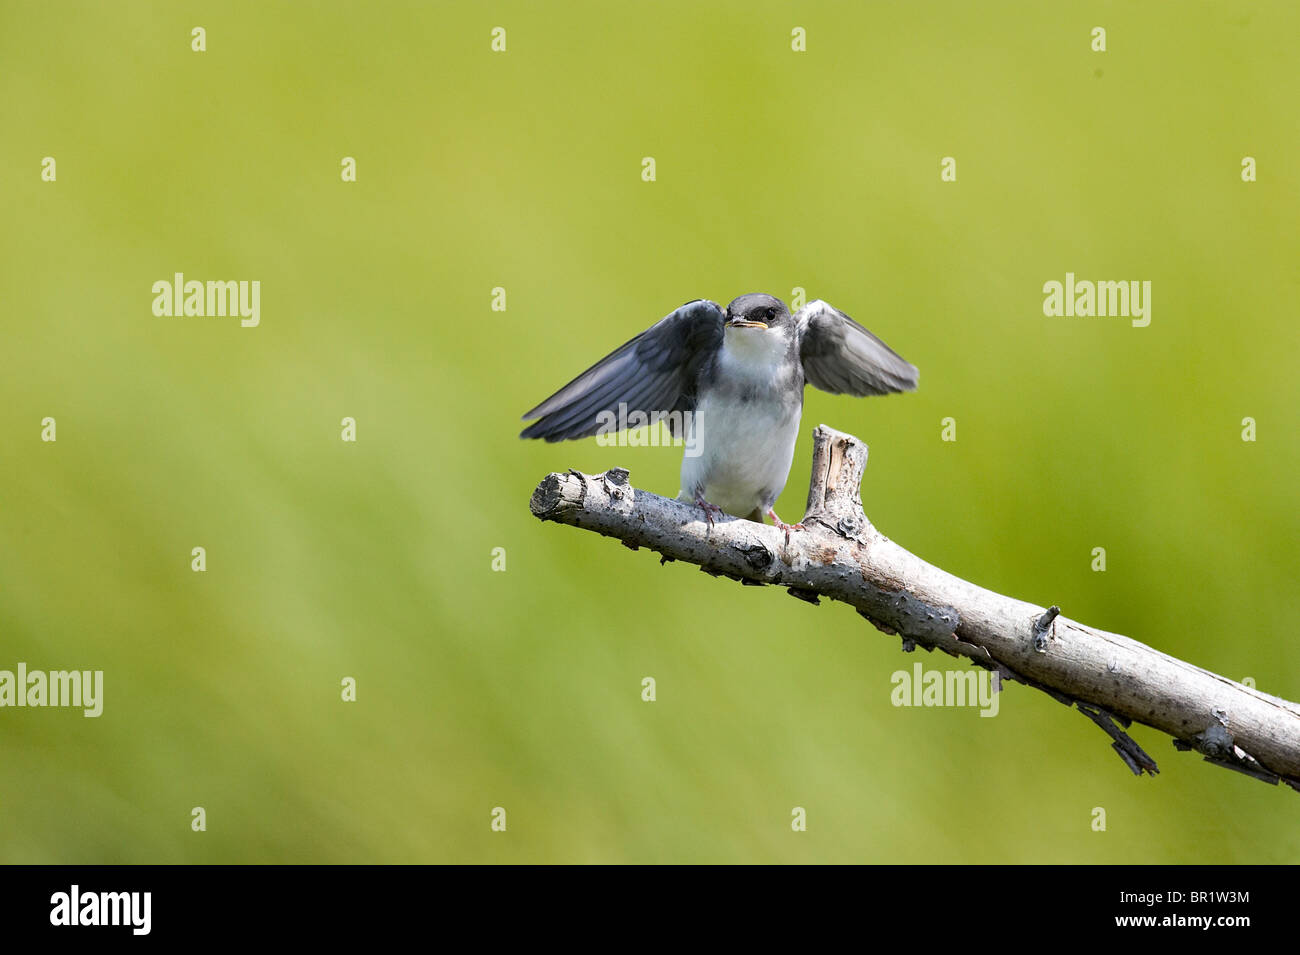 Tree Swallow Fledgling Perched on a Branch Begging for Food Stock Photo